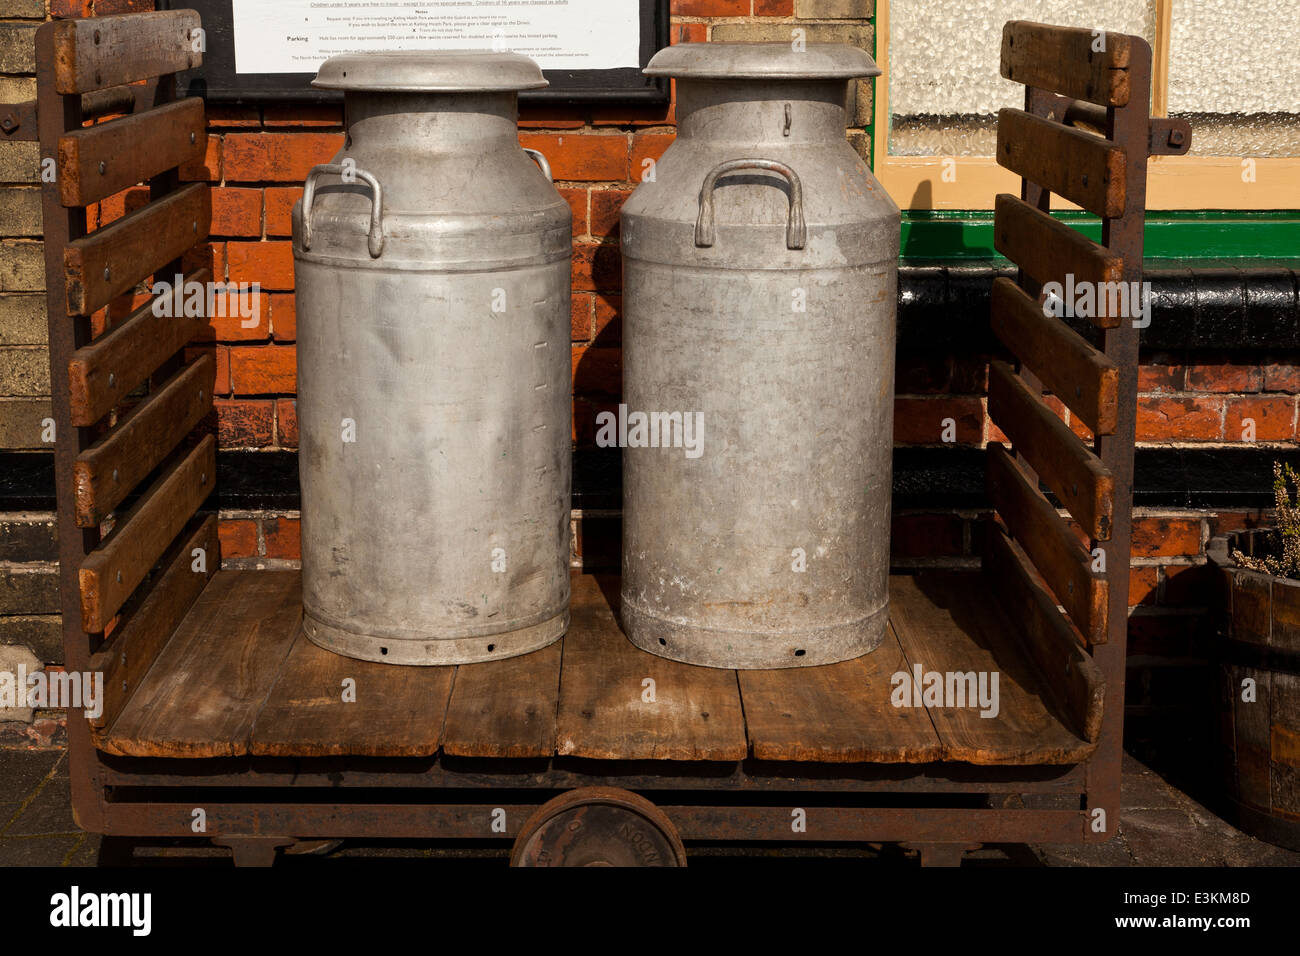 Two vintage milk churns on a railway trolley at a station Stock Photo